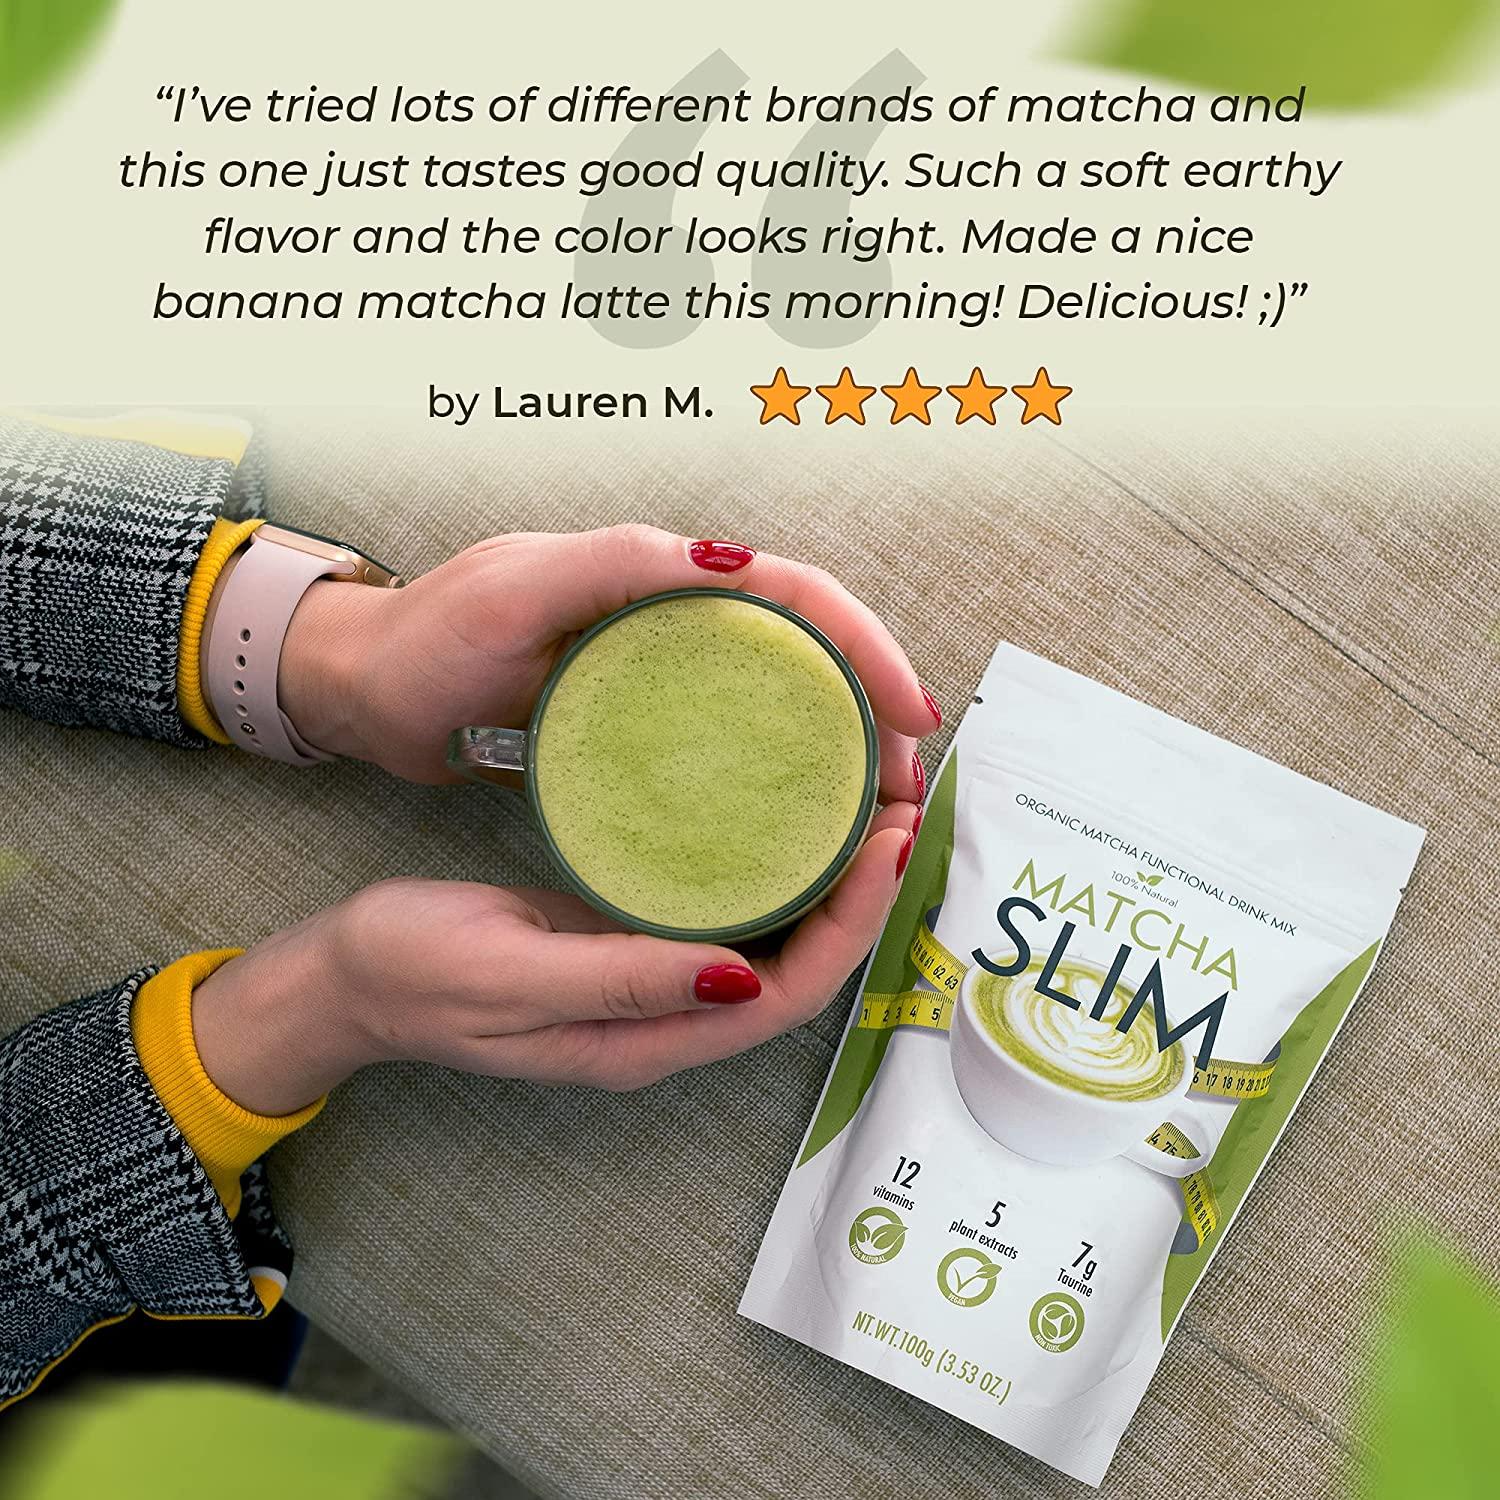 Compare prices for Matcha Slim across all European  stores